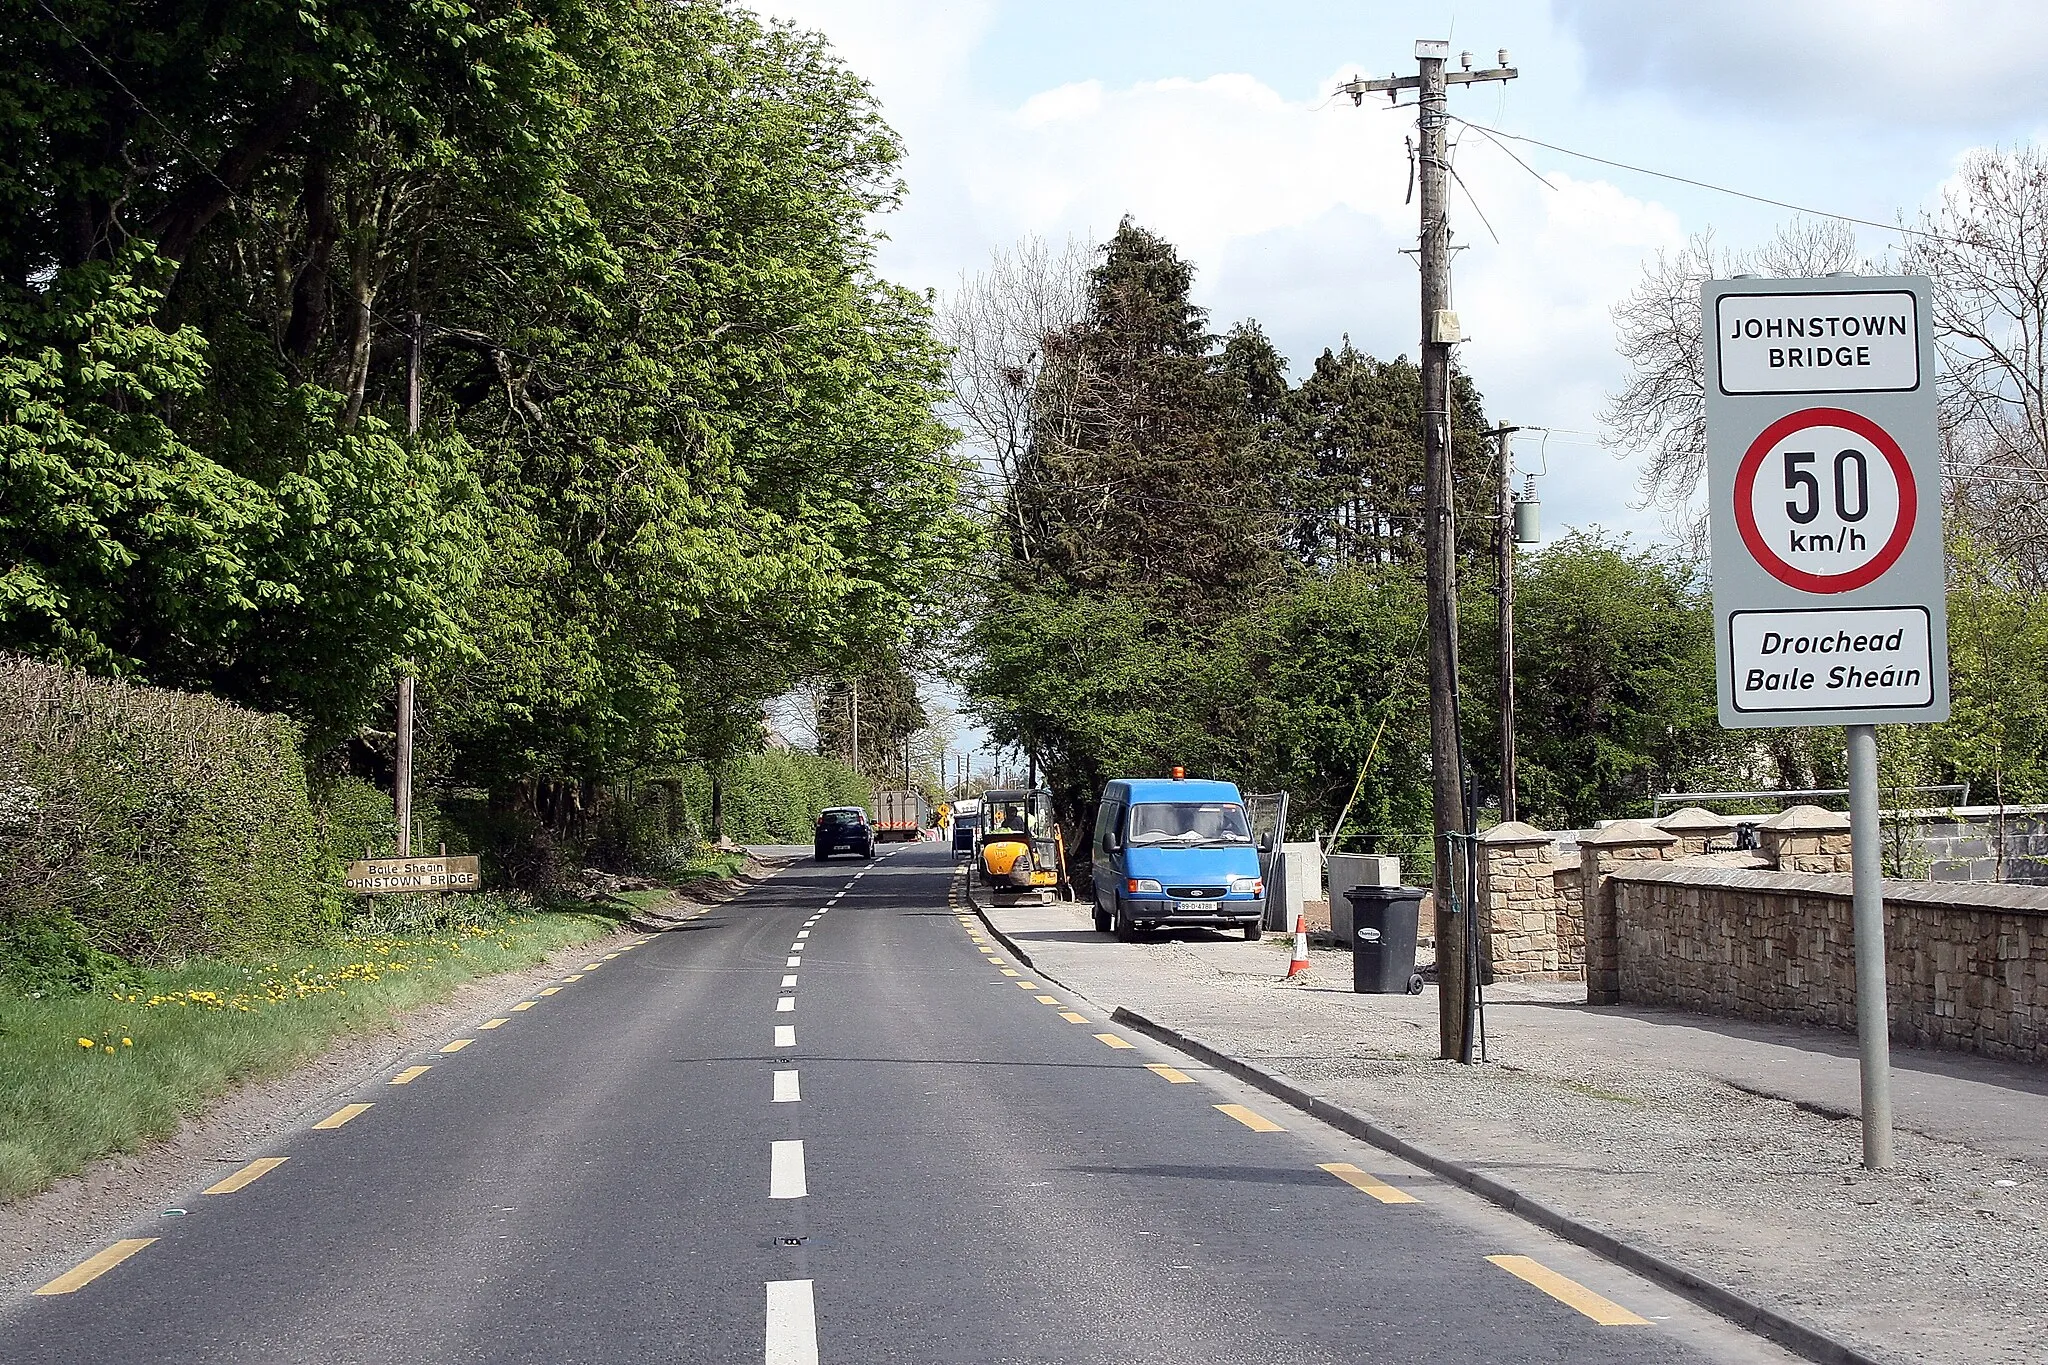 Photo showing: Johnstown Bridge in County Kildare on the R402 road approaching from the west